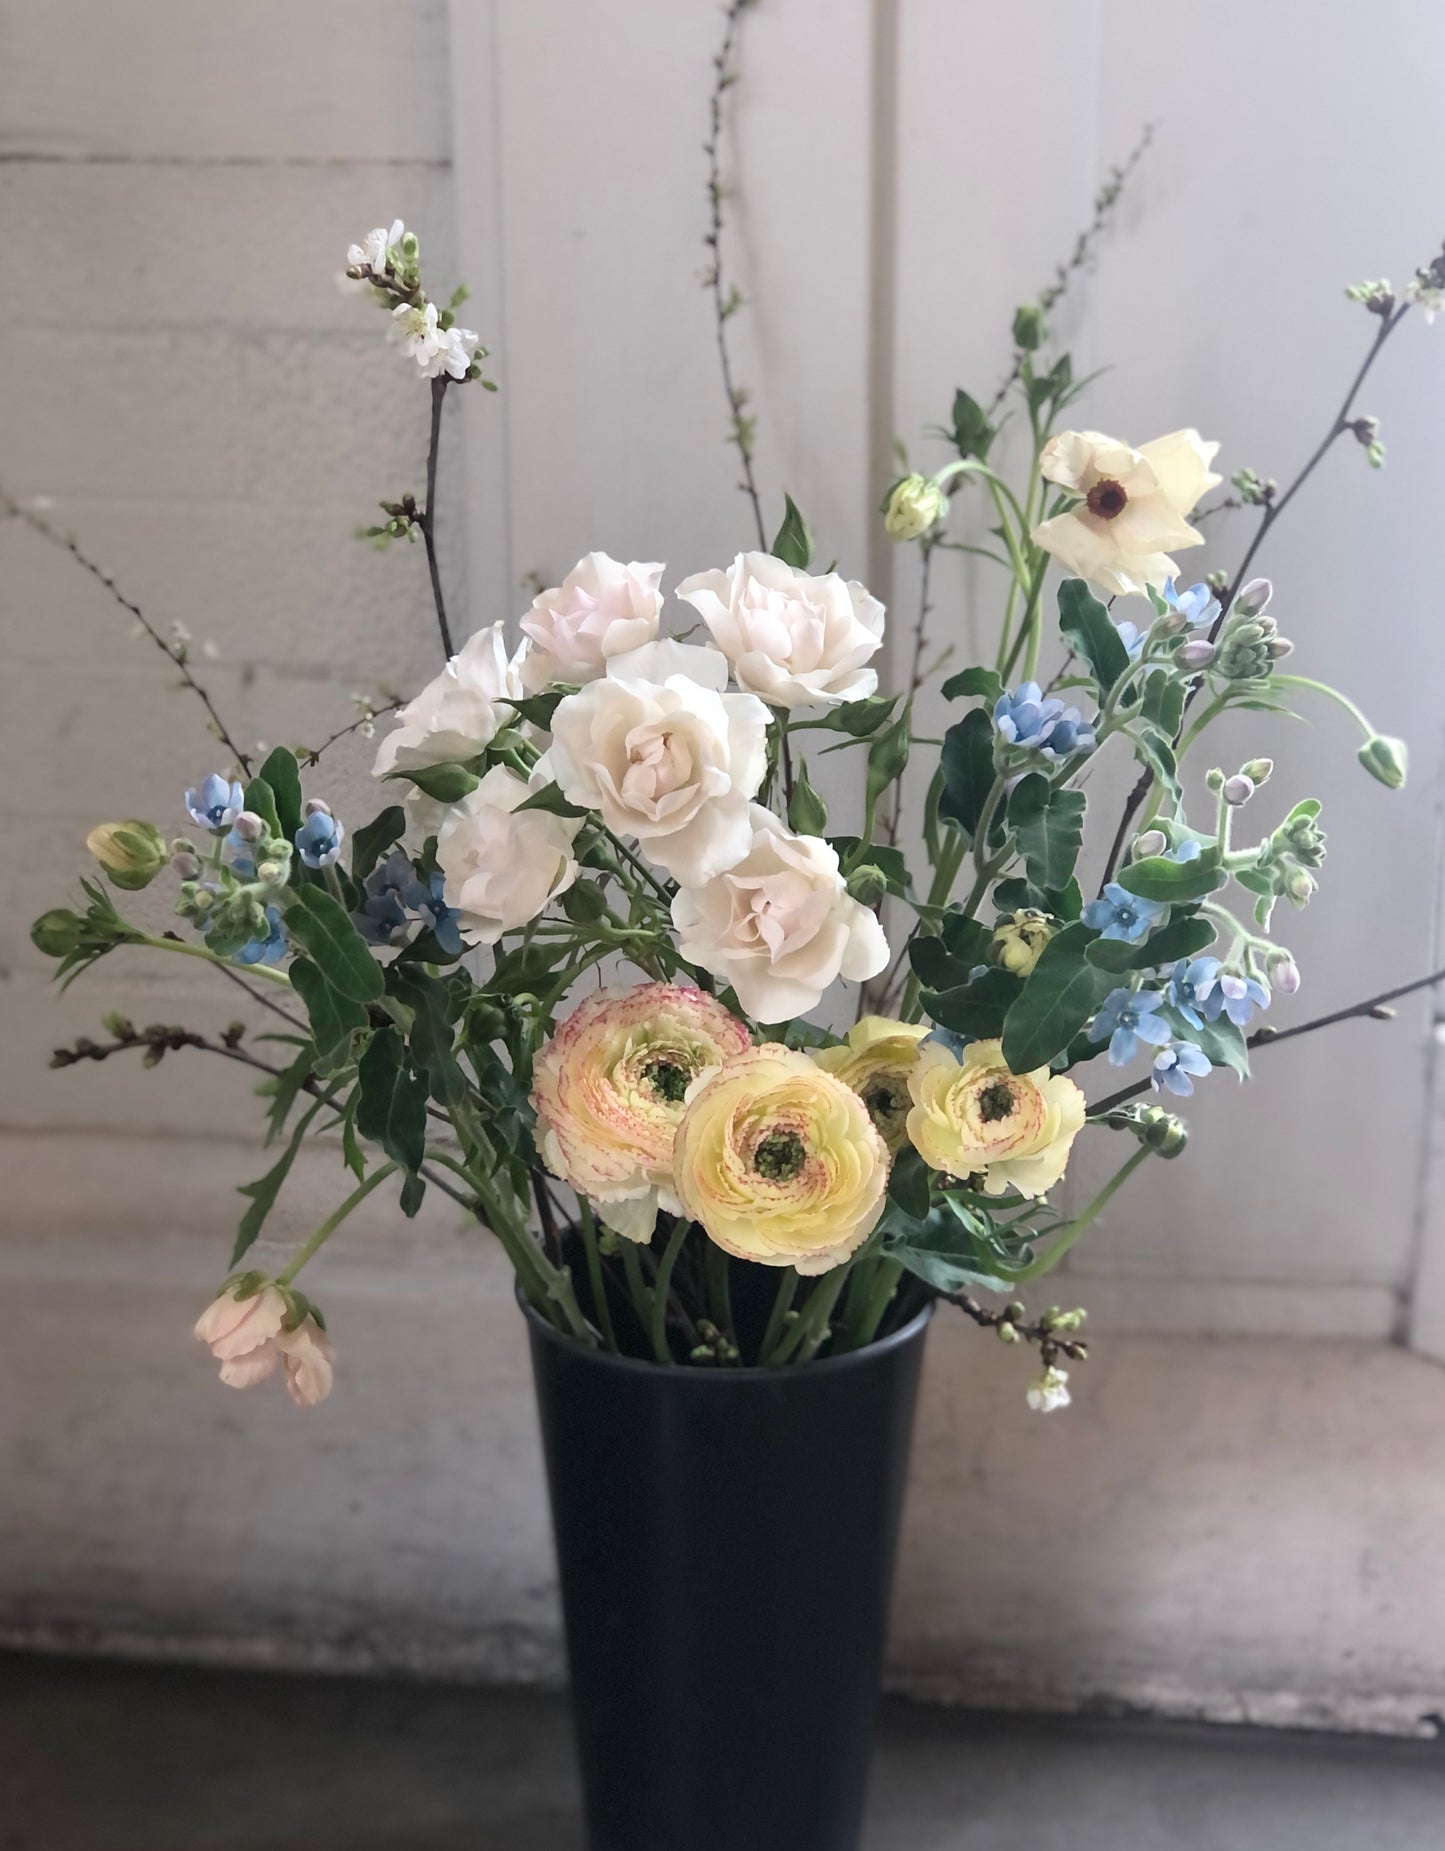 A Bucket Of Flowers To Arrange At Home